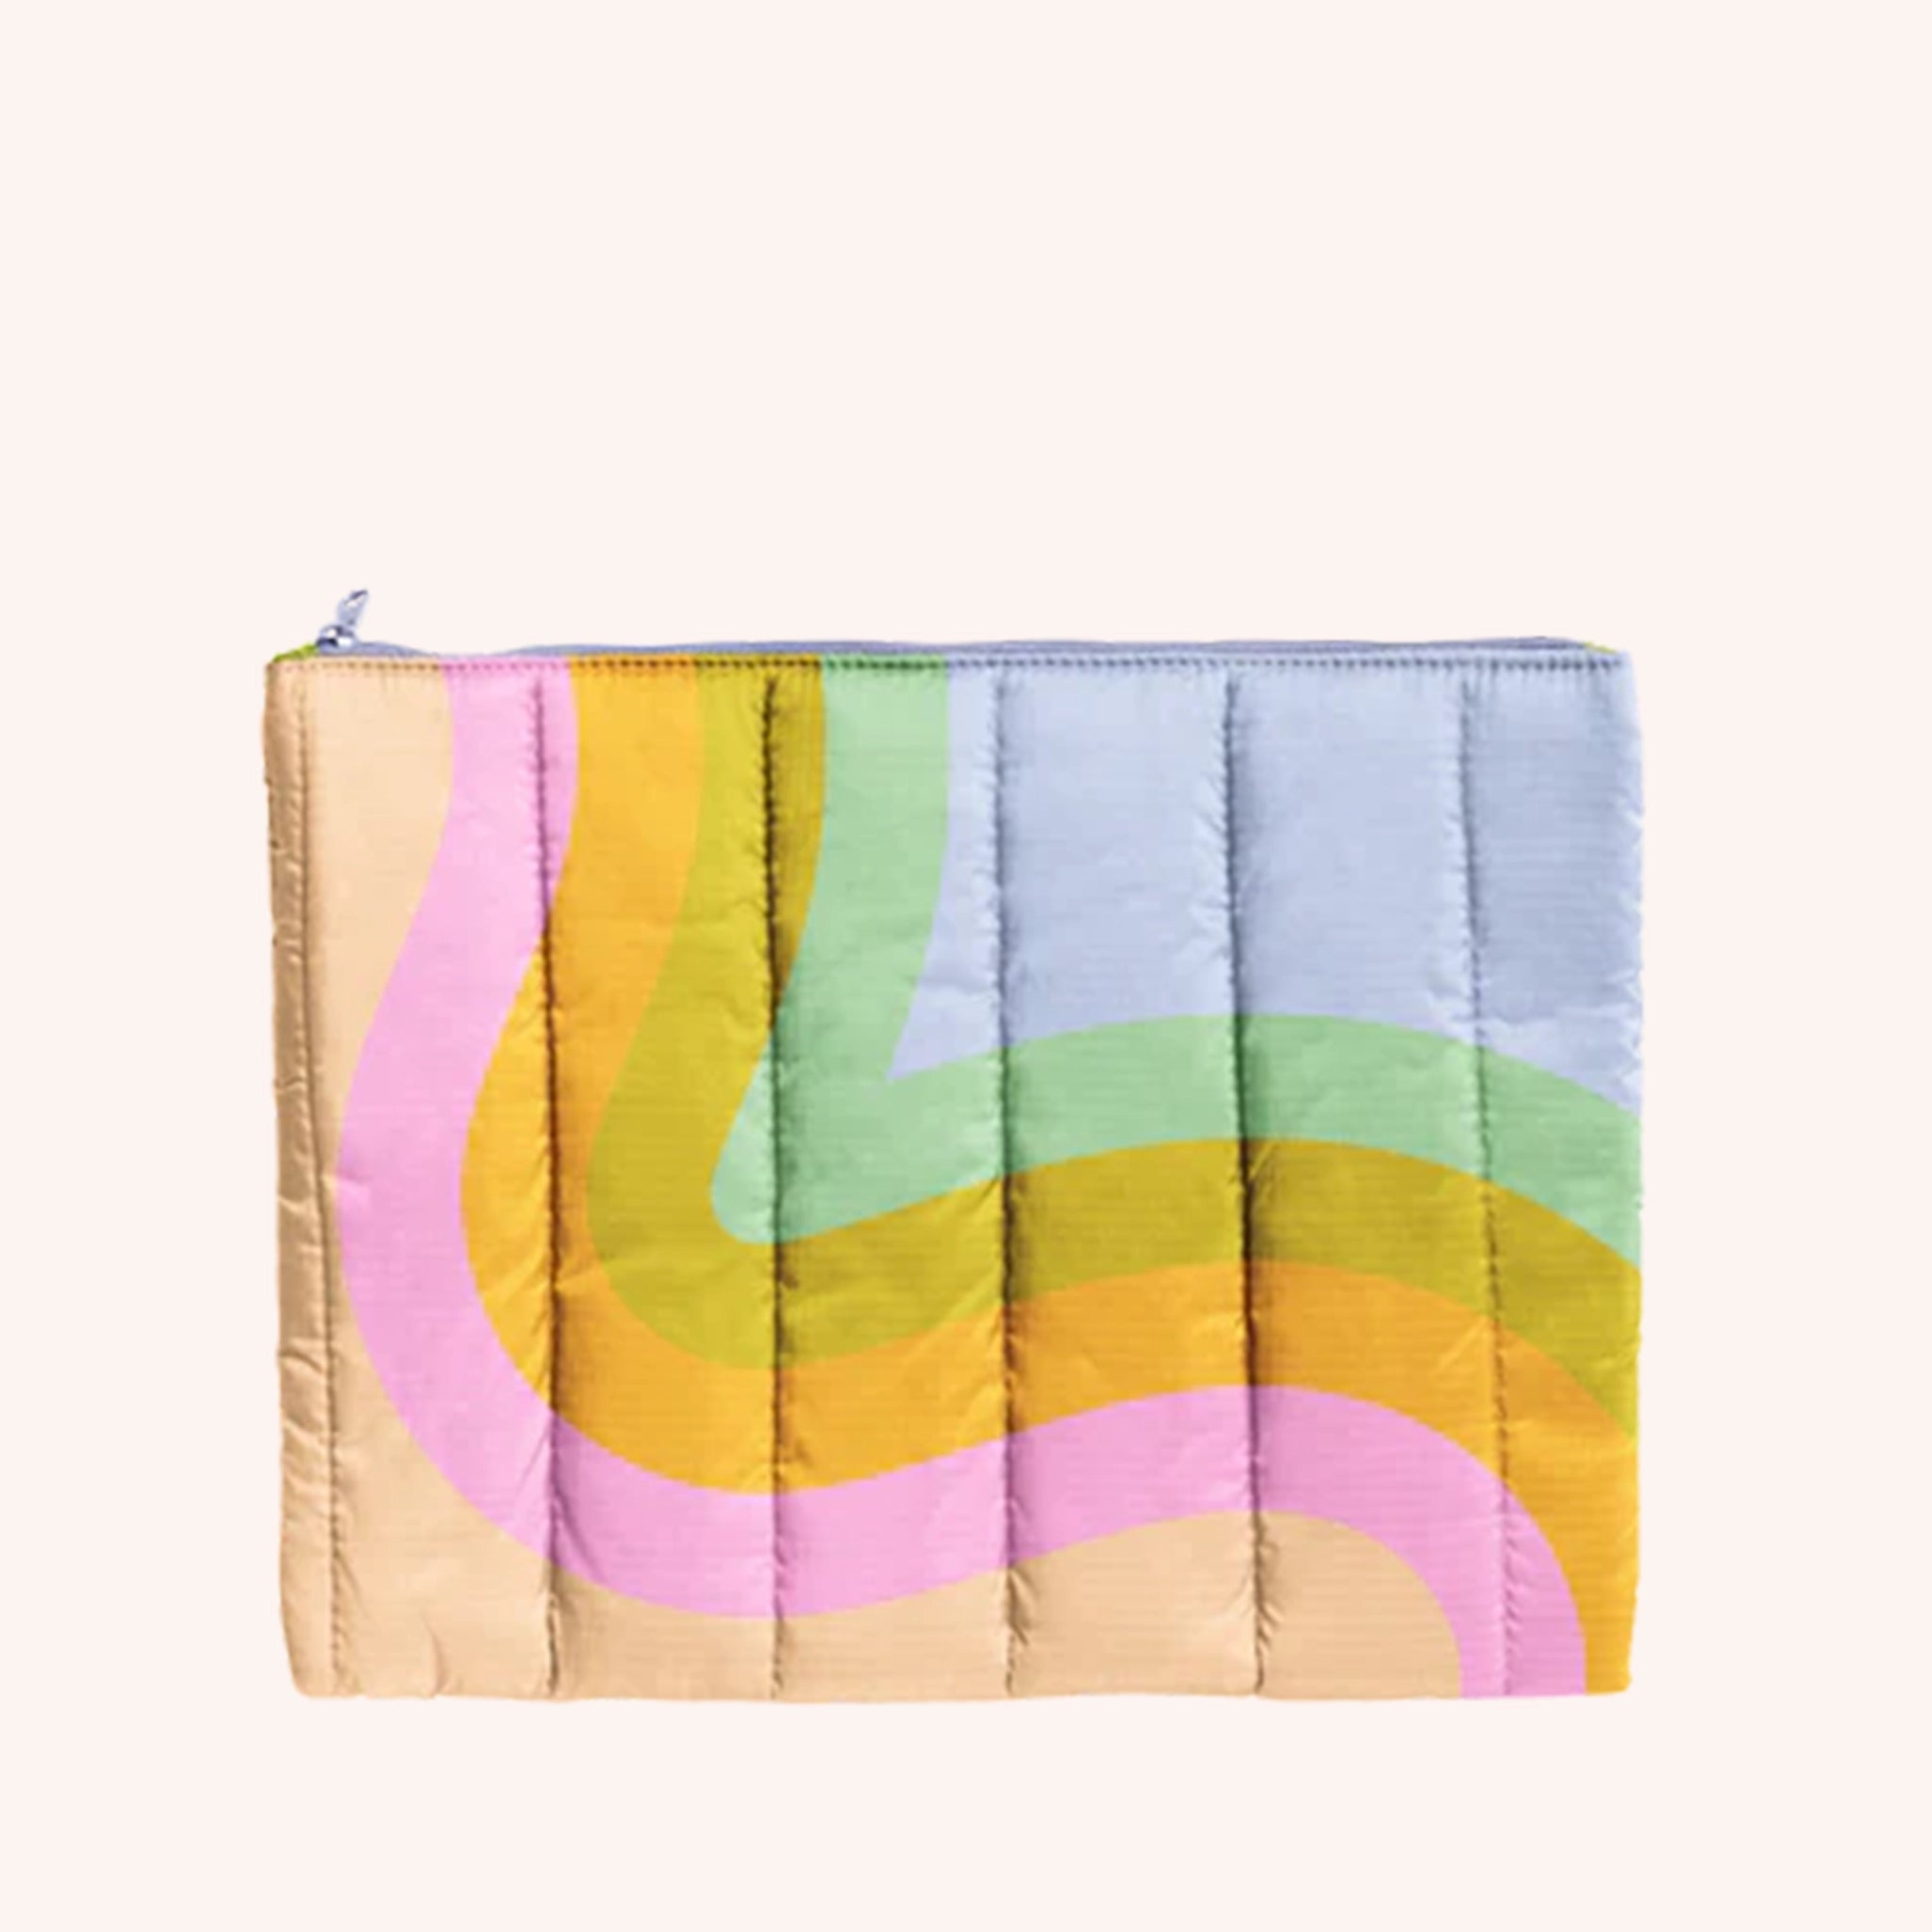 A puffy multicolored pouch with vertical detailing and a rainbow wavy design as well as a zipper closure.